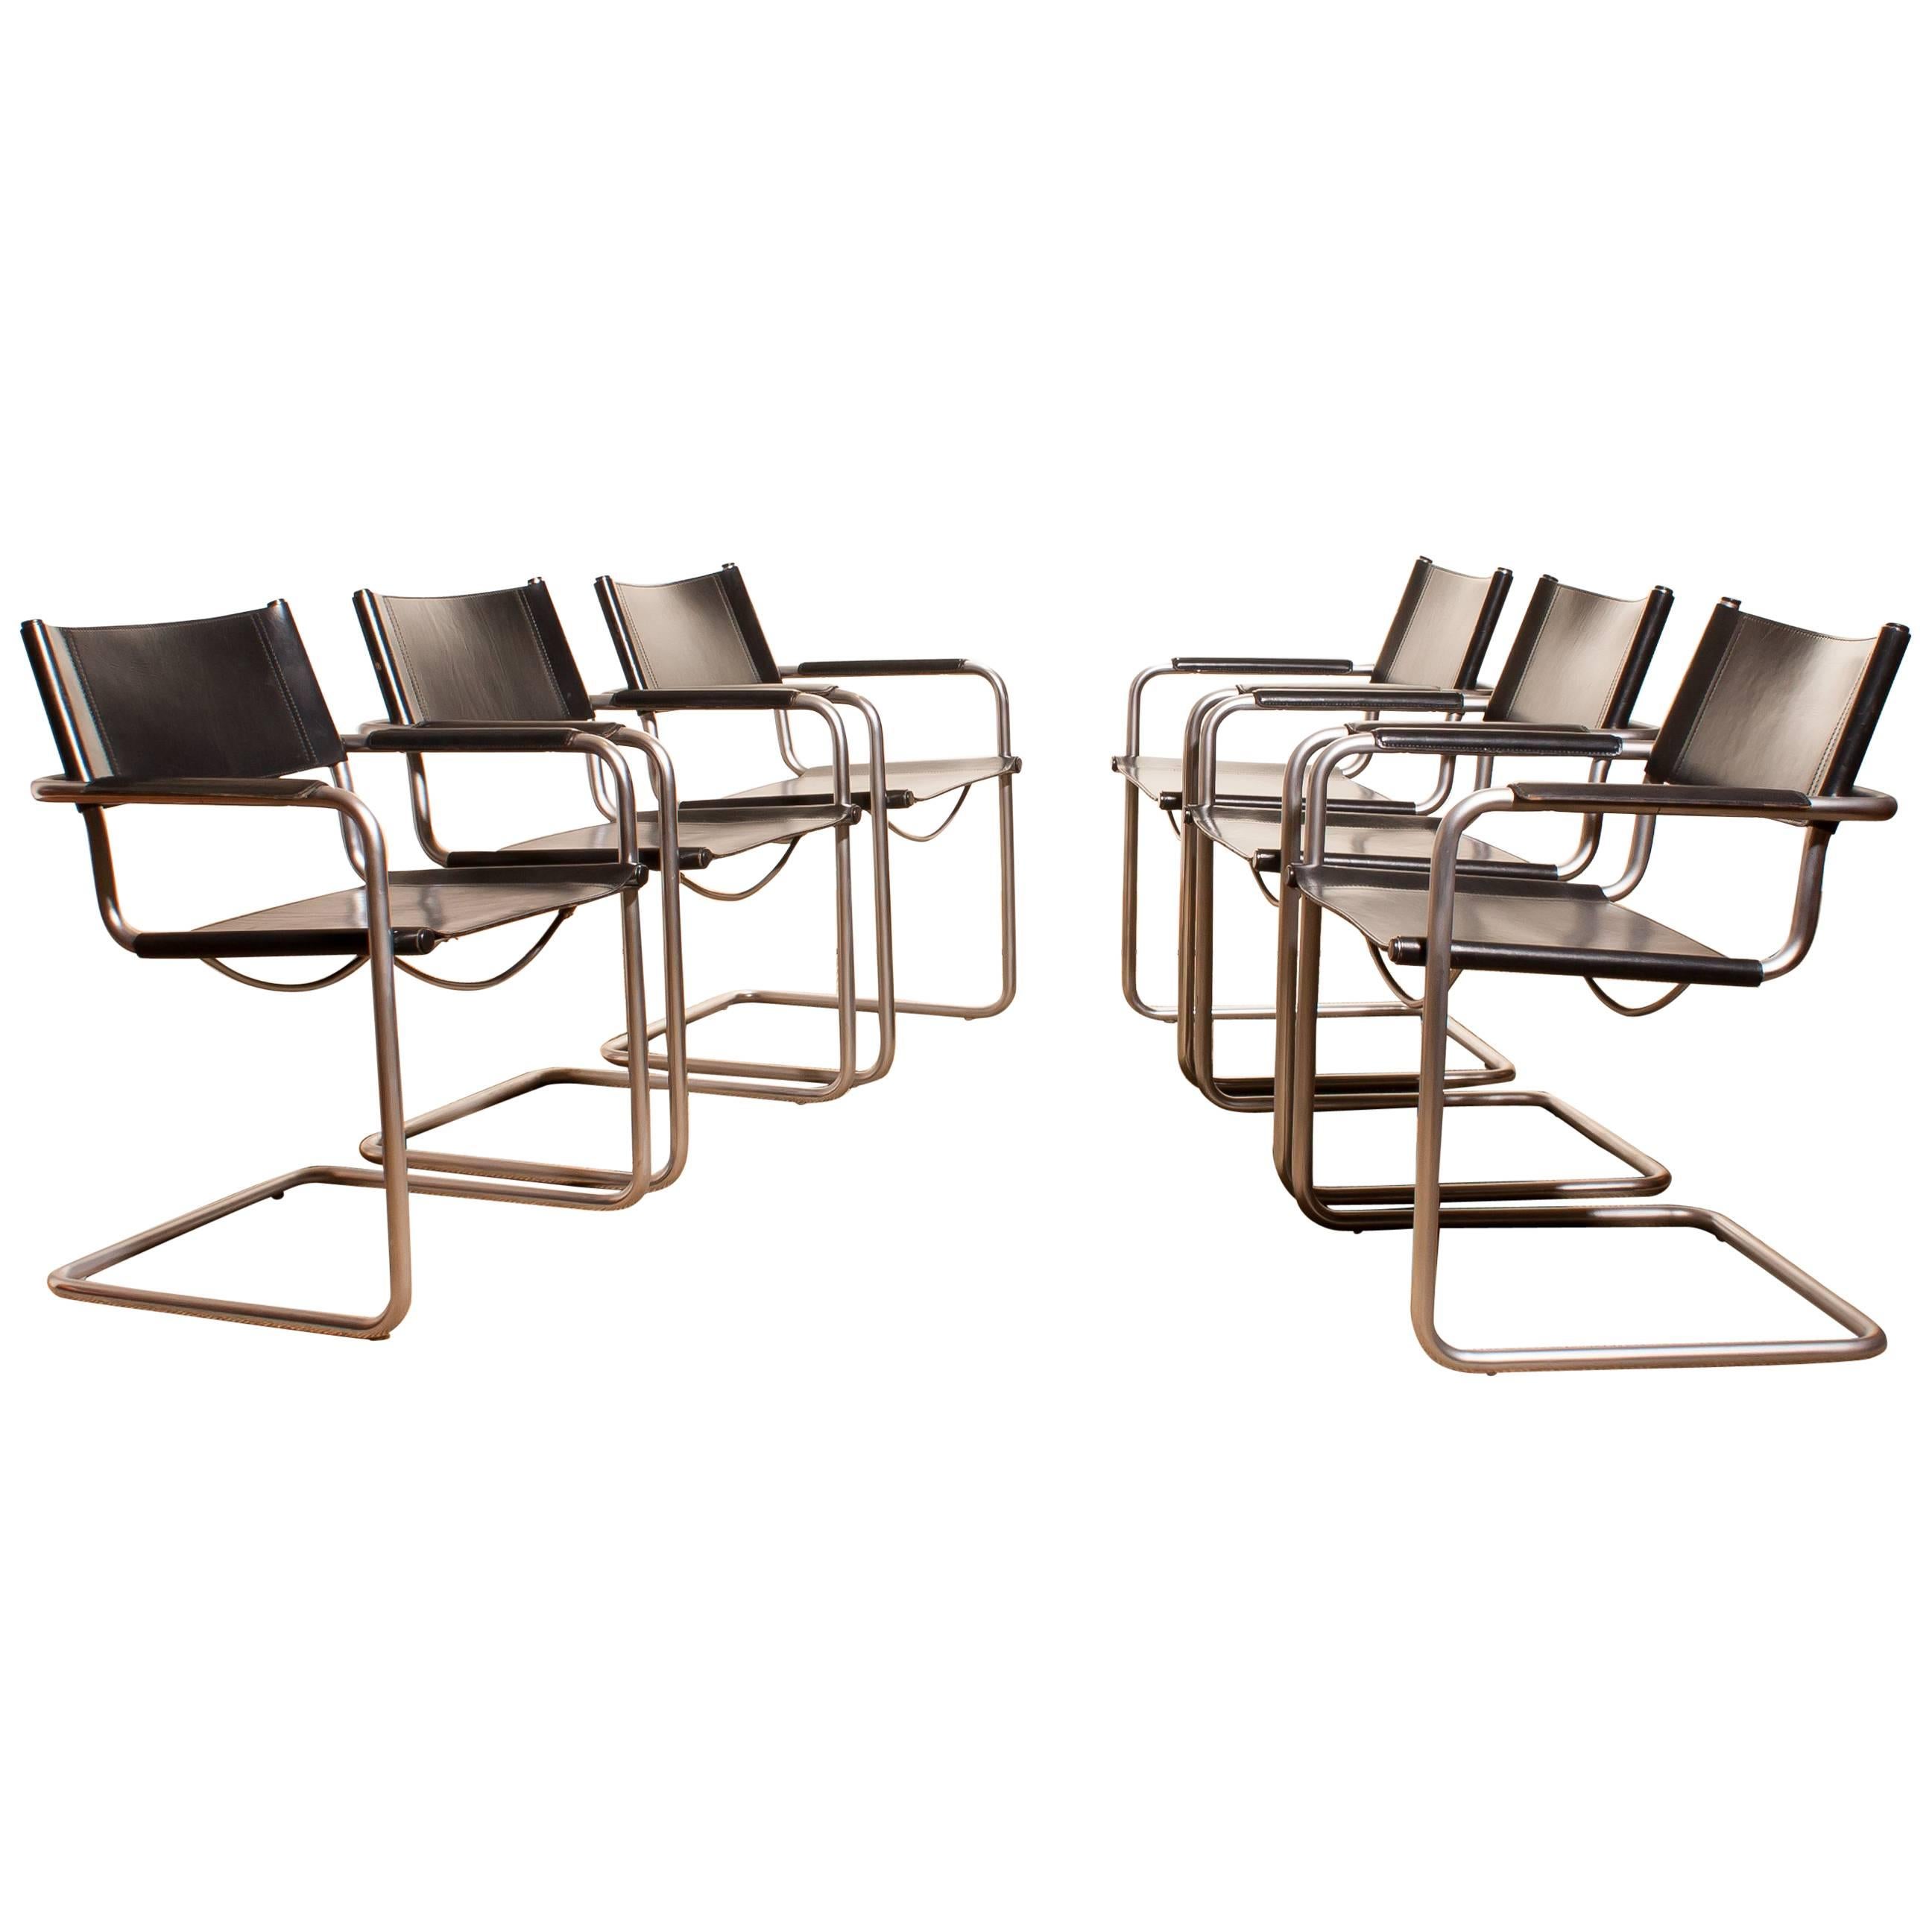 1970s, Set of Six Tubular Steel and Black Leather Dining Chairs by Matteo Grassi